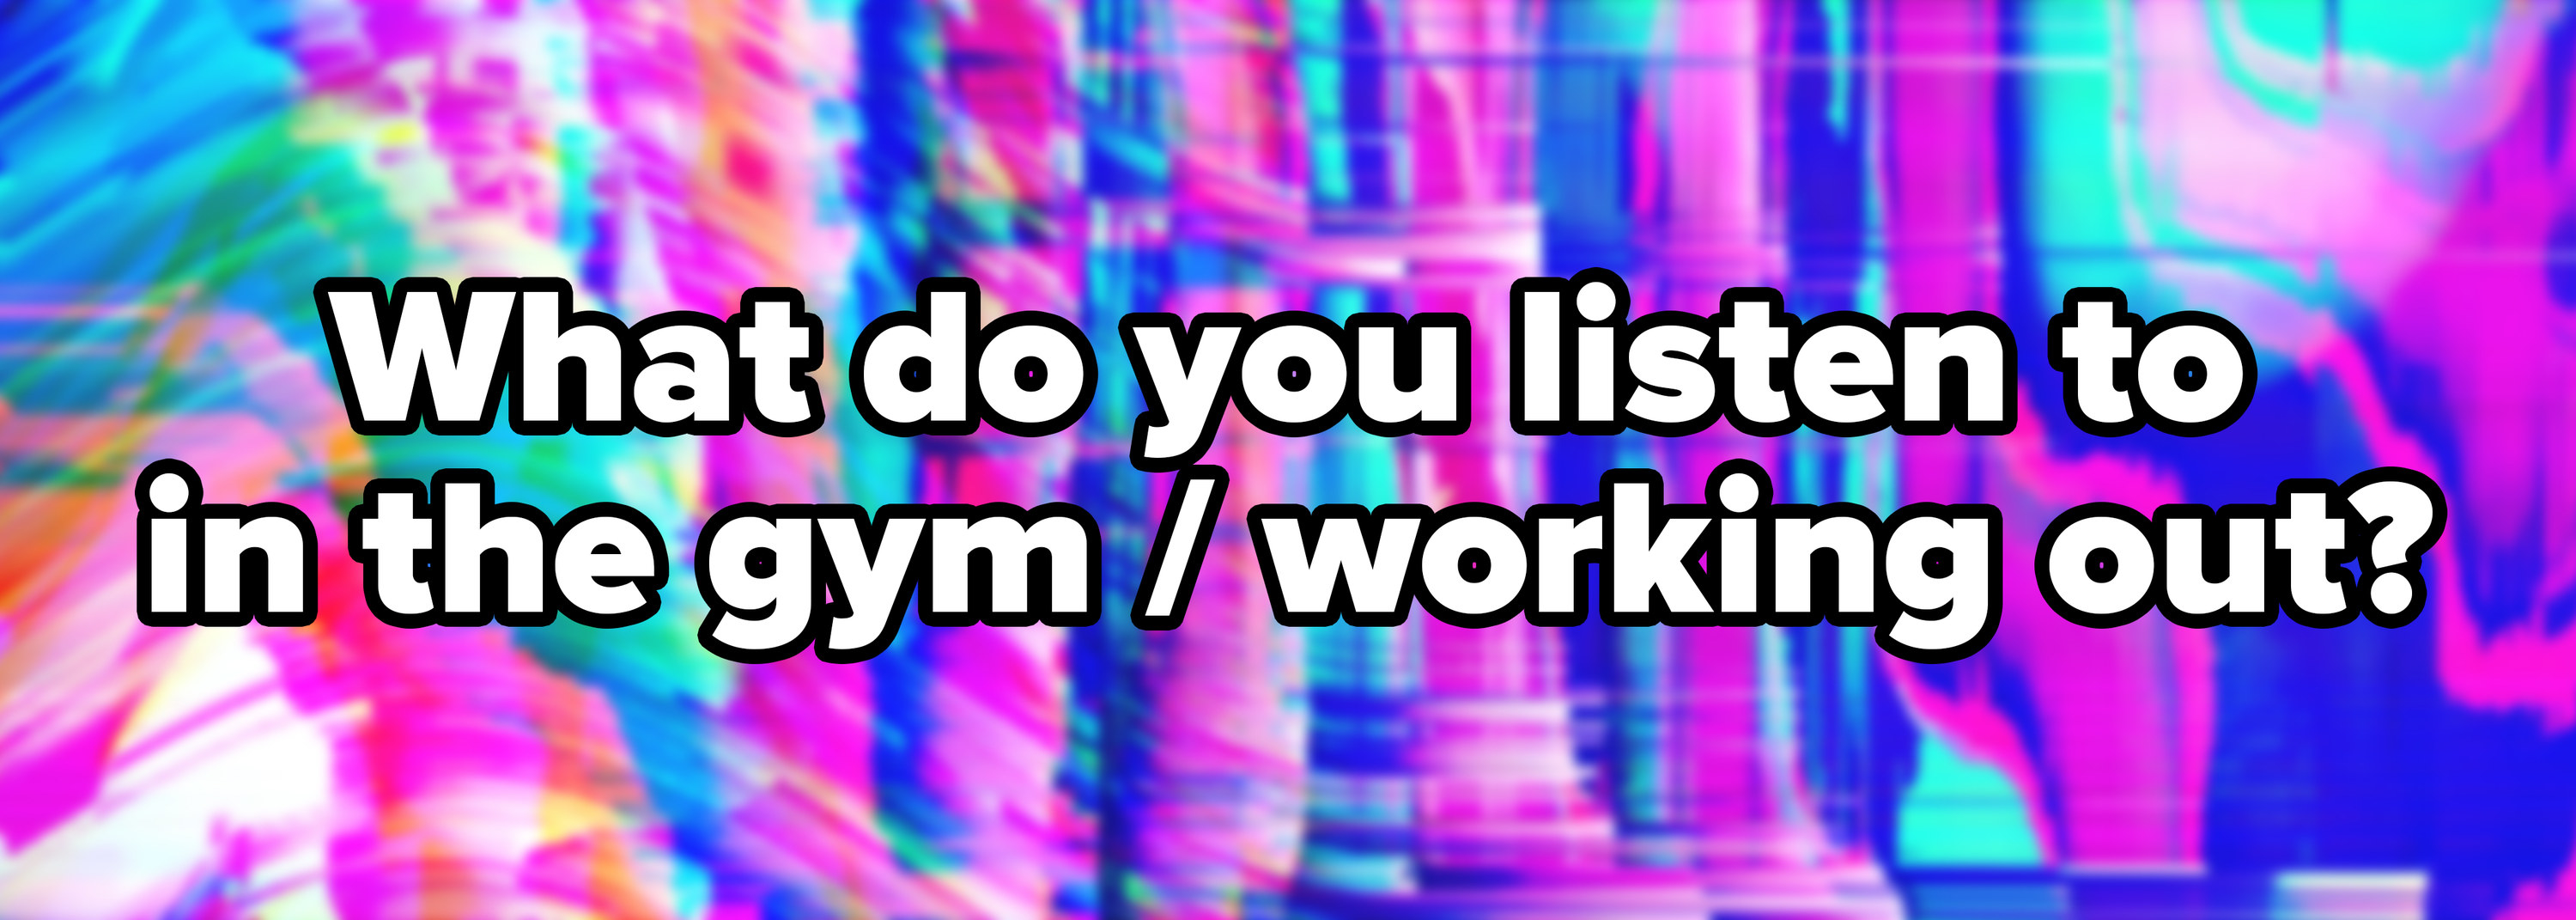 Abstract pink blue psychedelic background with the text What do you listen to in the gym working out written on top